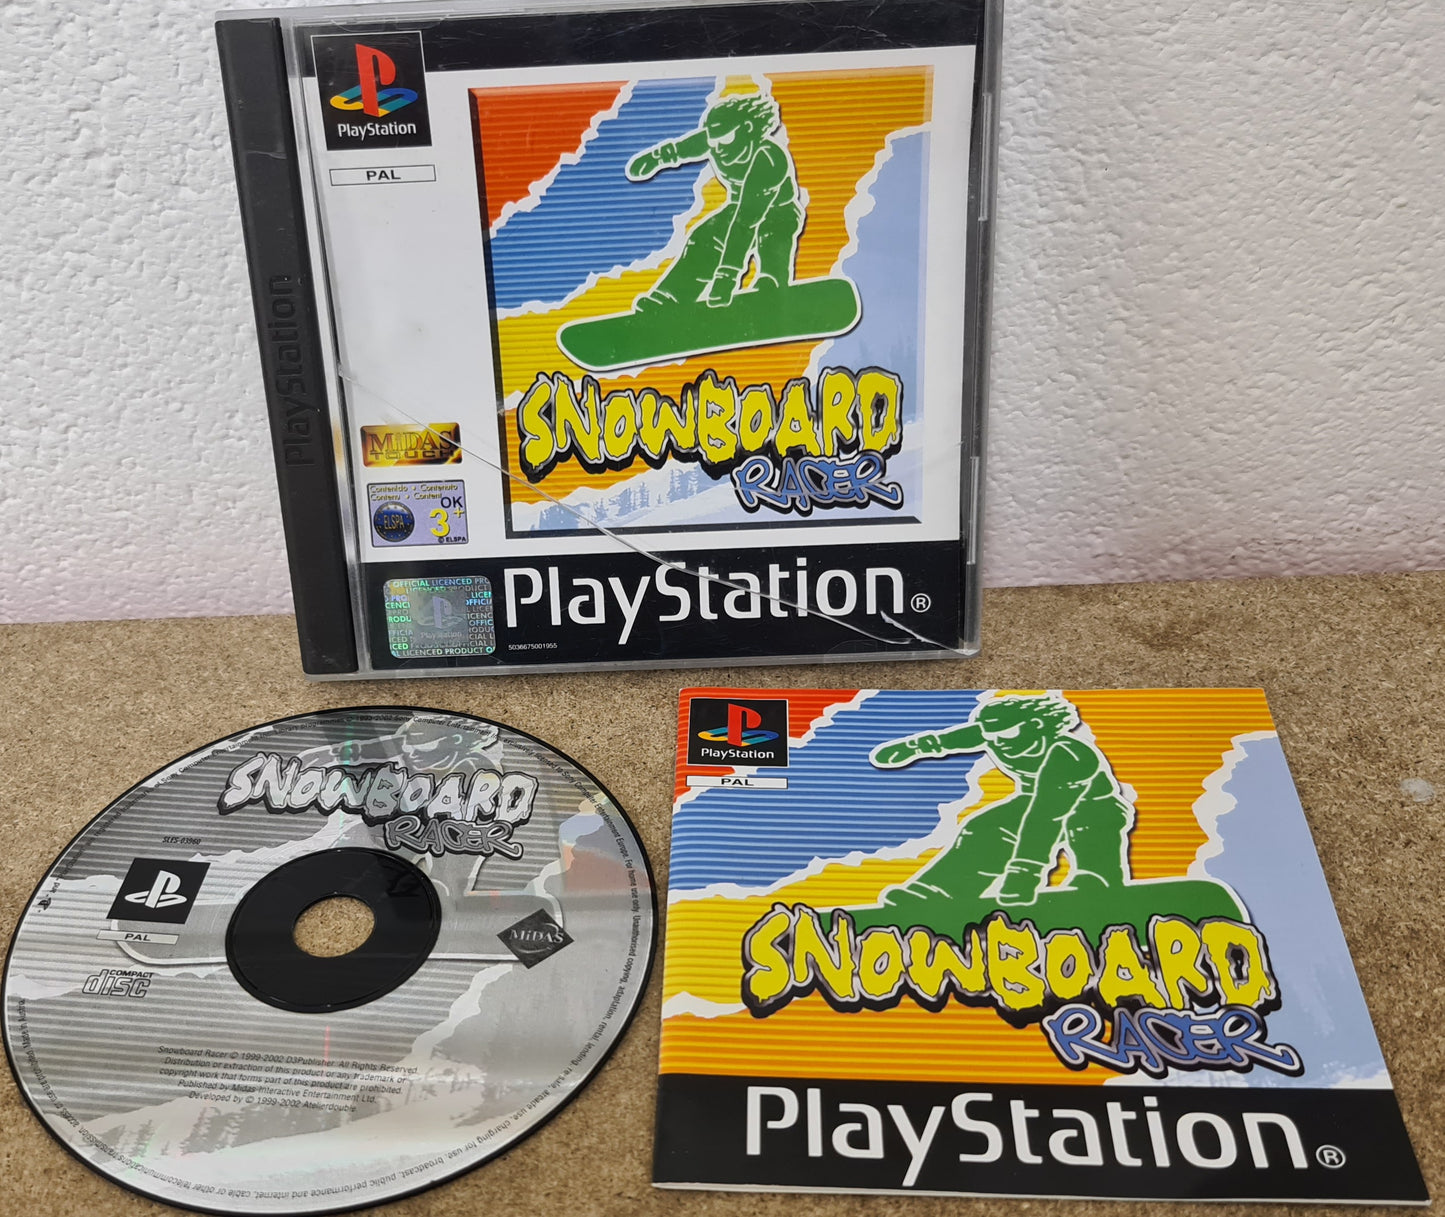 Snowboard Racer Sony Playstation 1 (PS1) Game